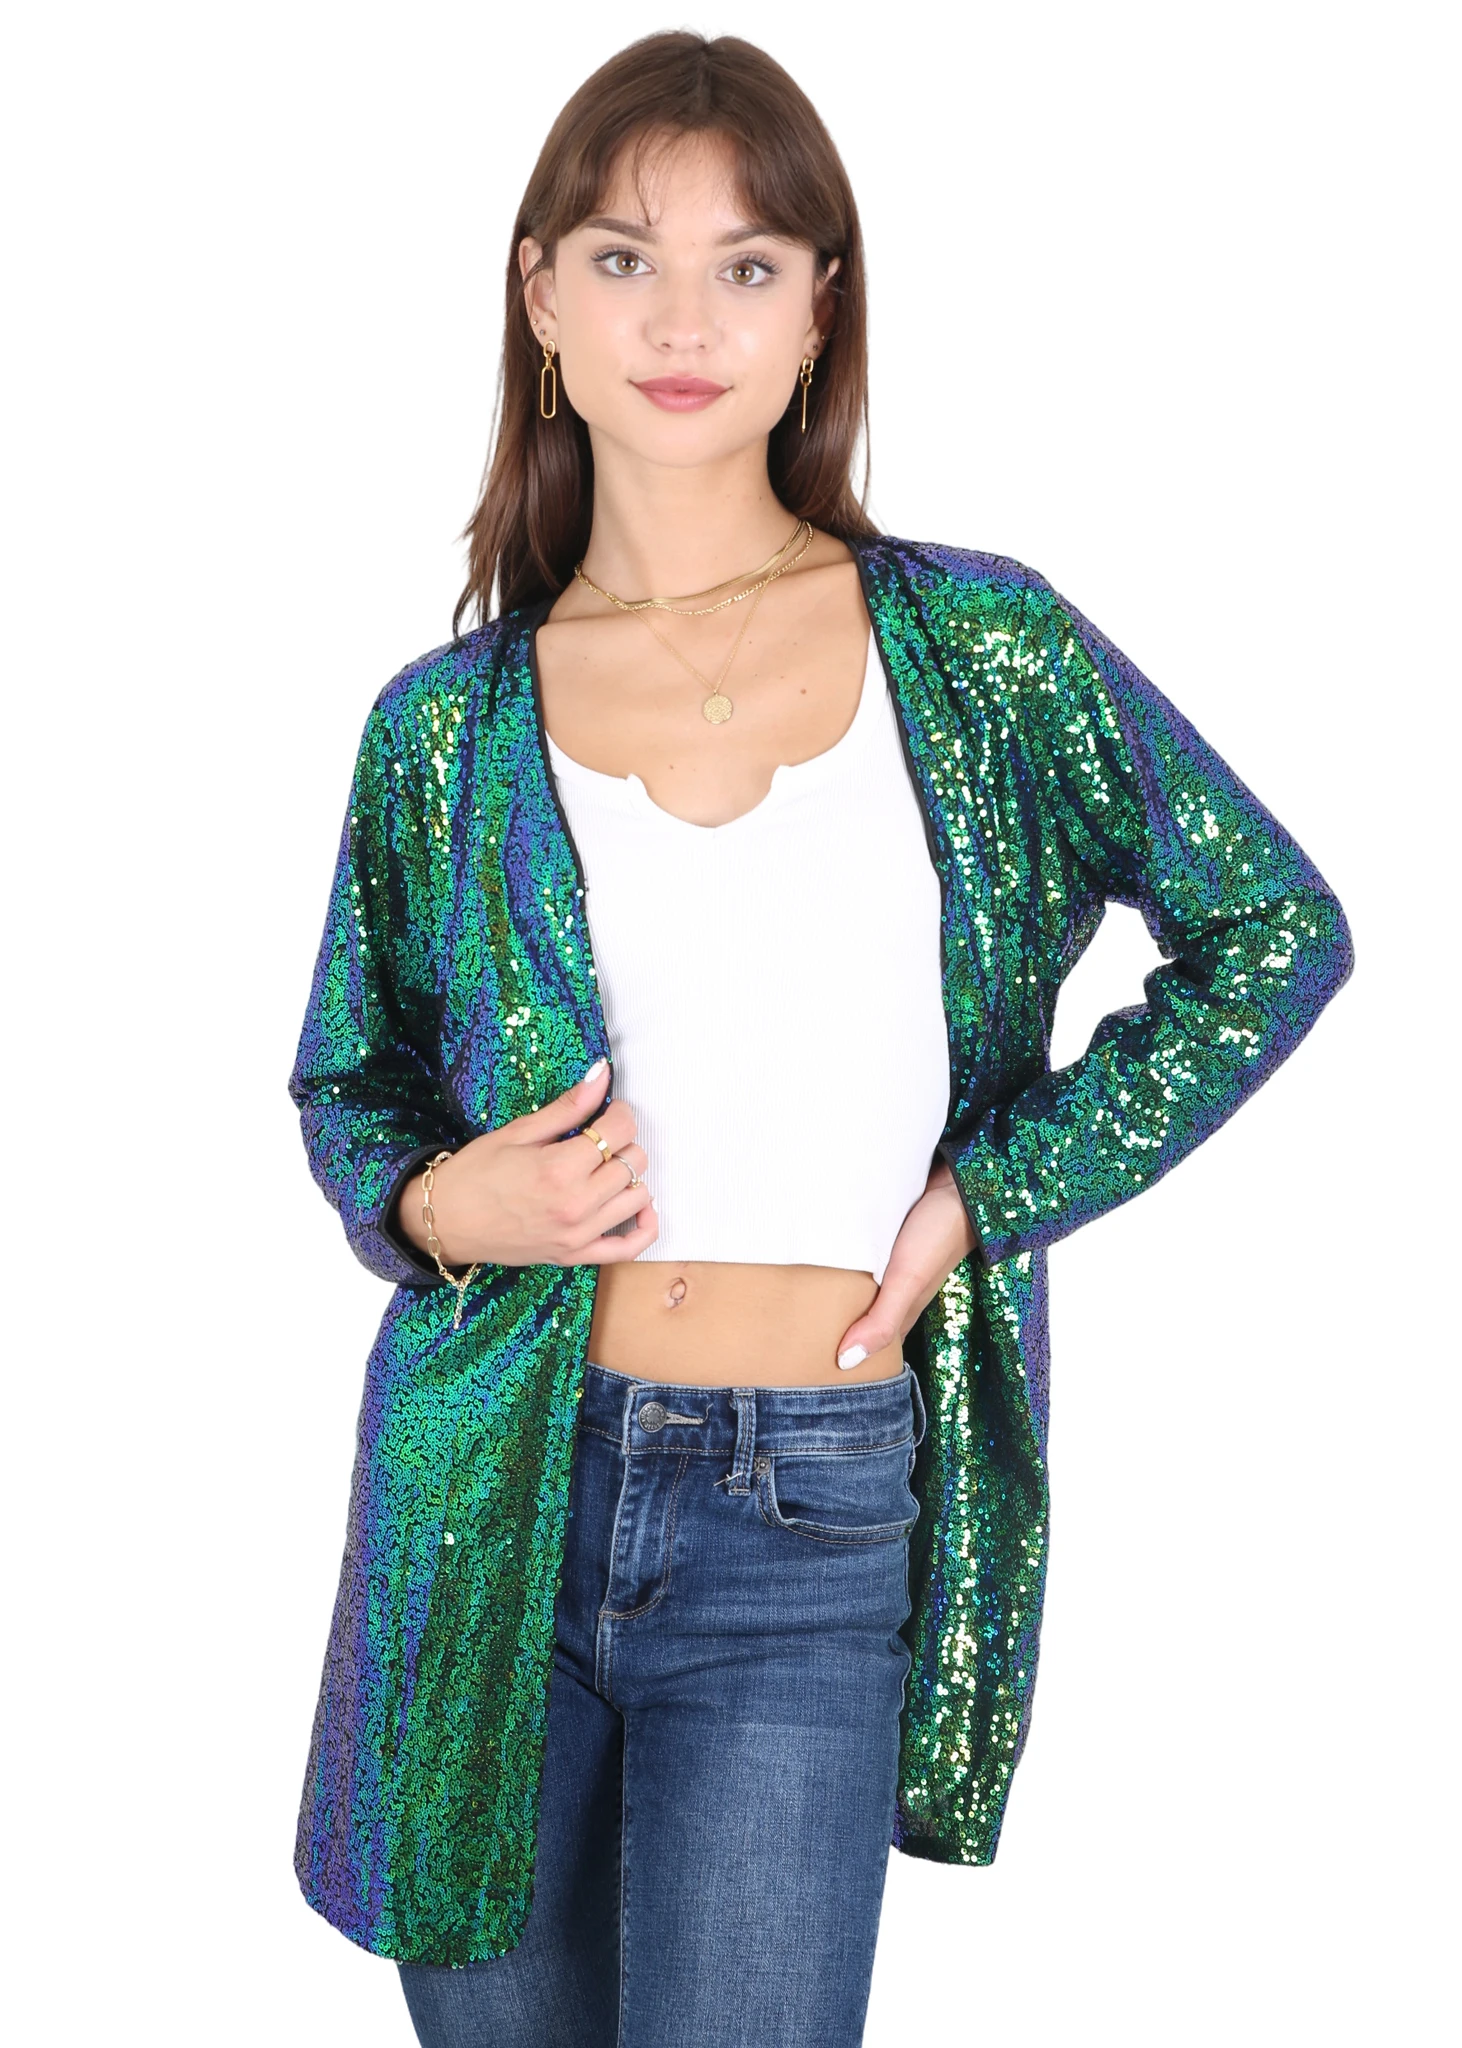 Women's Open Front Sequin Coat Las Vegas Blazer Party Club Cocktail Jacket Outerwear Sparkly Sequined Cardigan Jacket nightclub stage wear las vegas women rhinestone jumpsuits party dance rave festival drag queen outfit